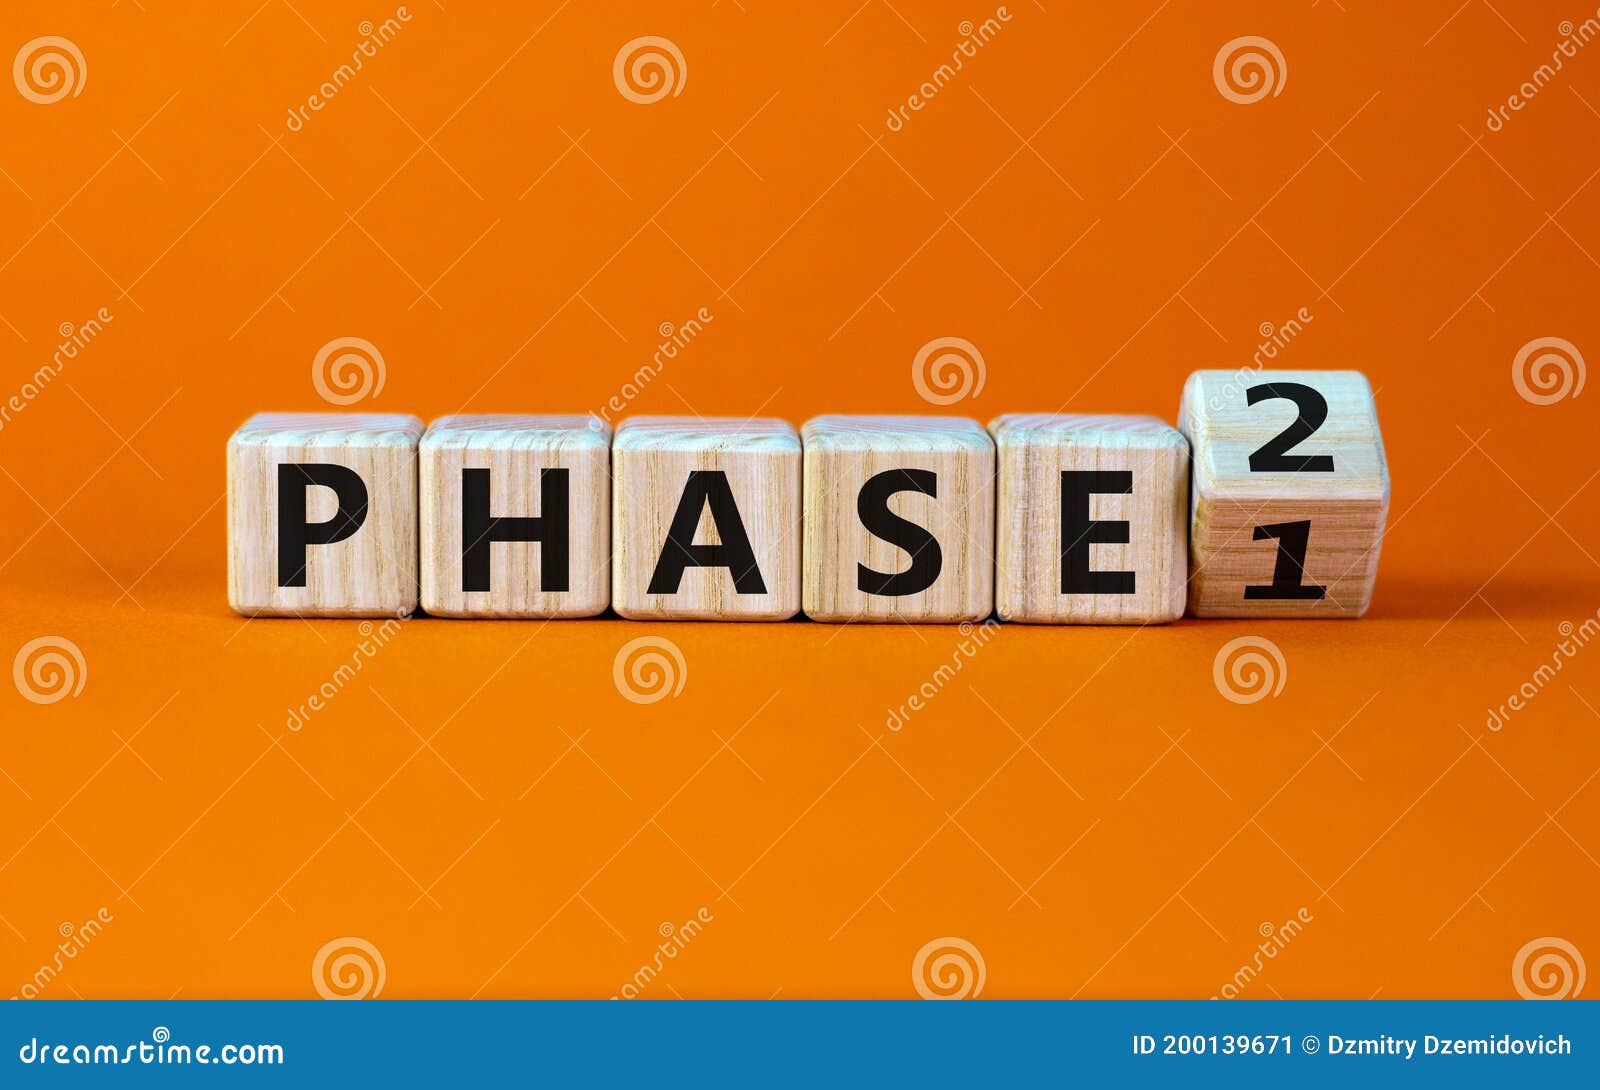 time for phase 2. turntd a cube and changed the word `phase 1` to `phase 2`. beautiful orange background. business concept. co